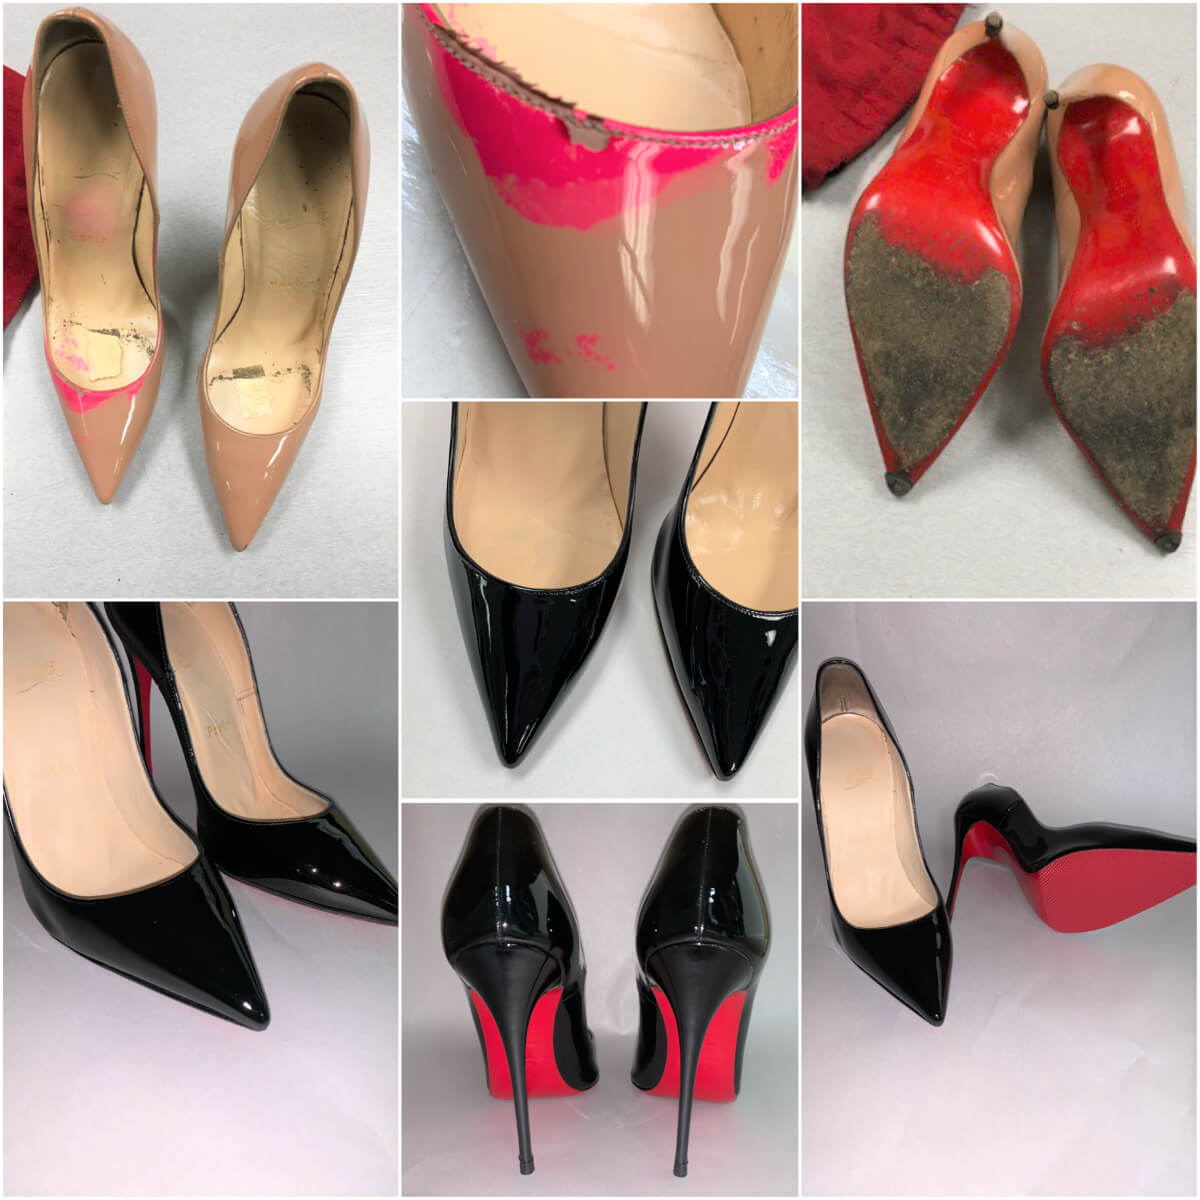 Louboutin Patent Leather Repair and Color Change, Protective Soles Added